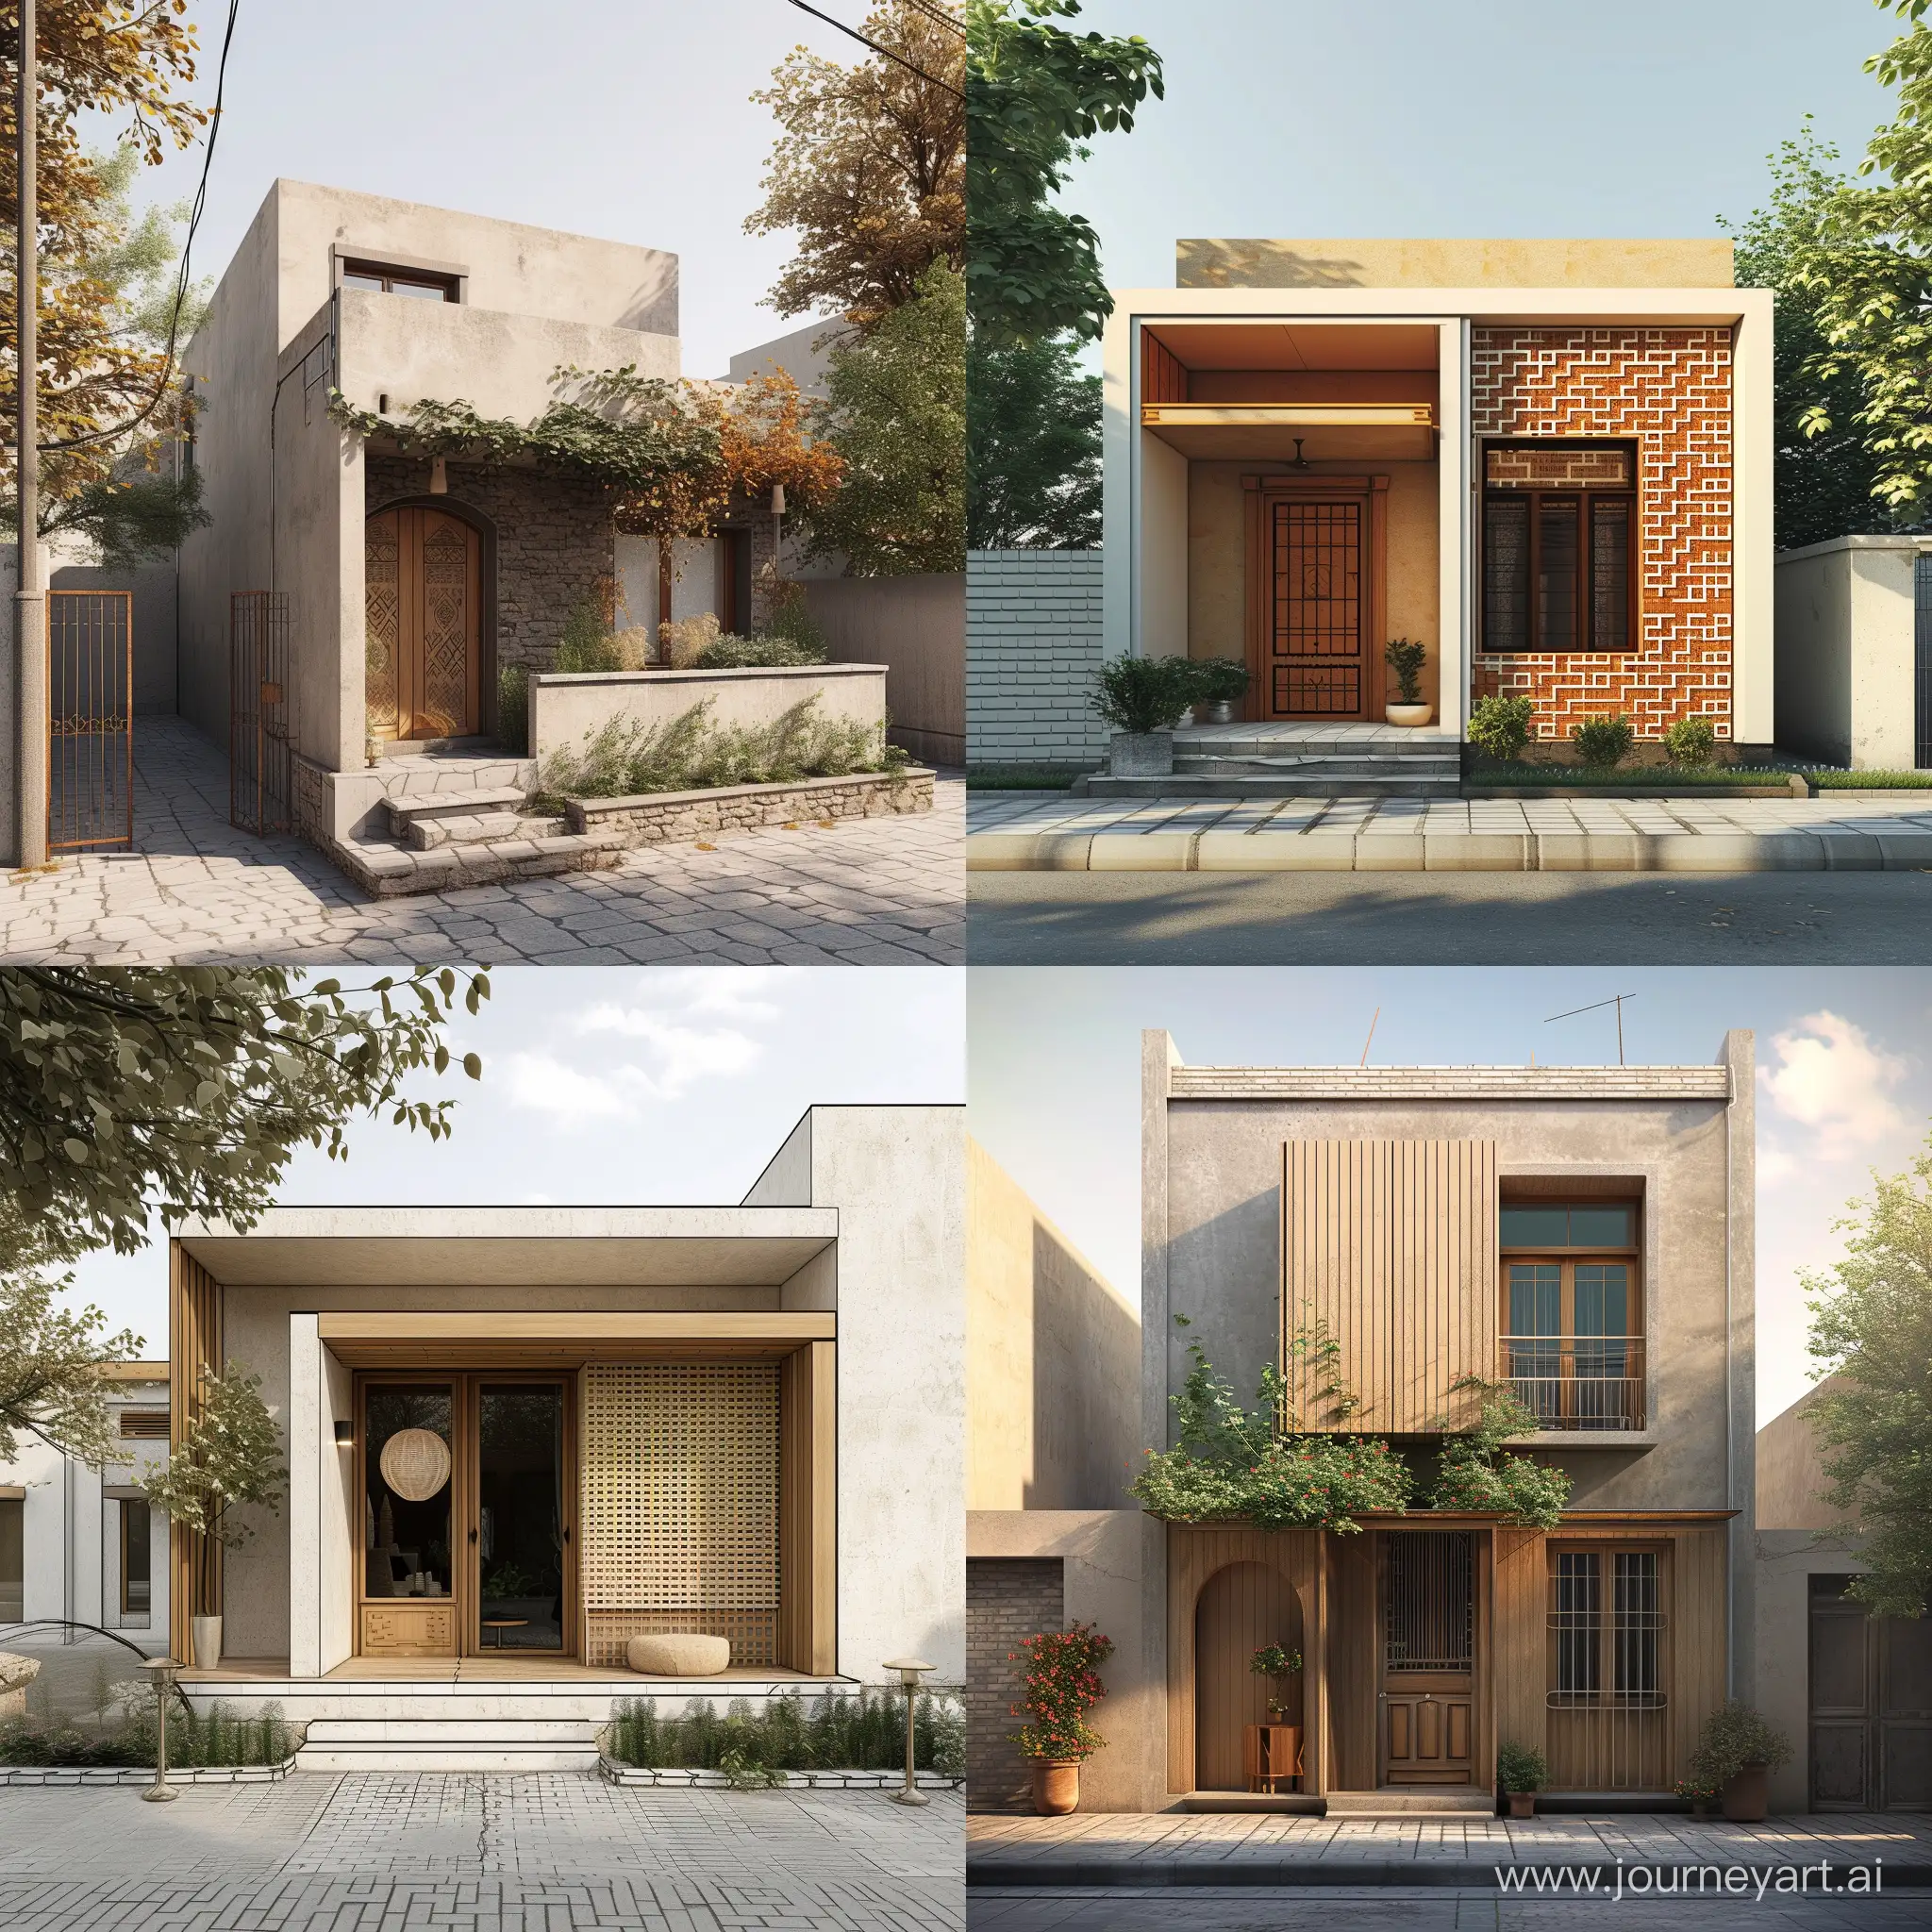 PostColonial-Urban-House-Design-in-Zahedan-Realistic-Architectural-Rendering